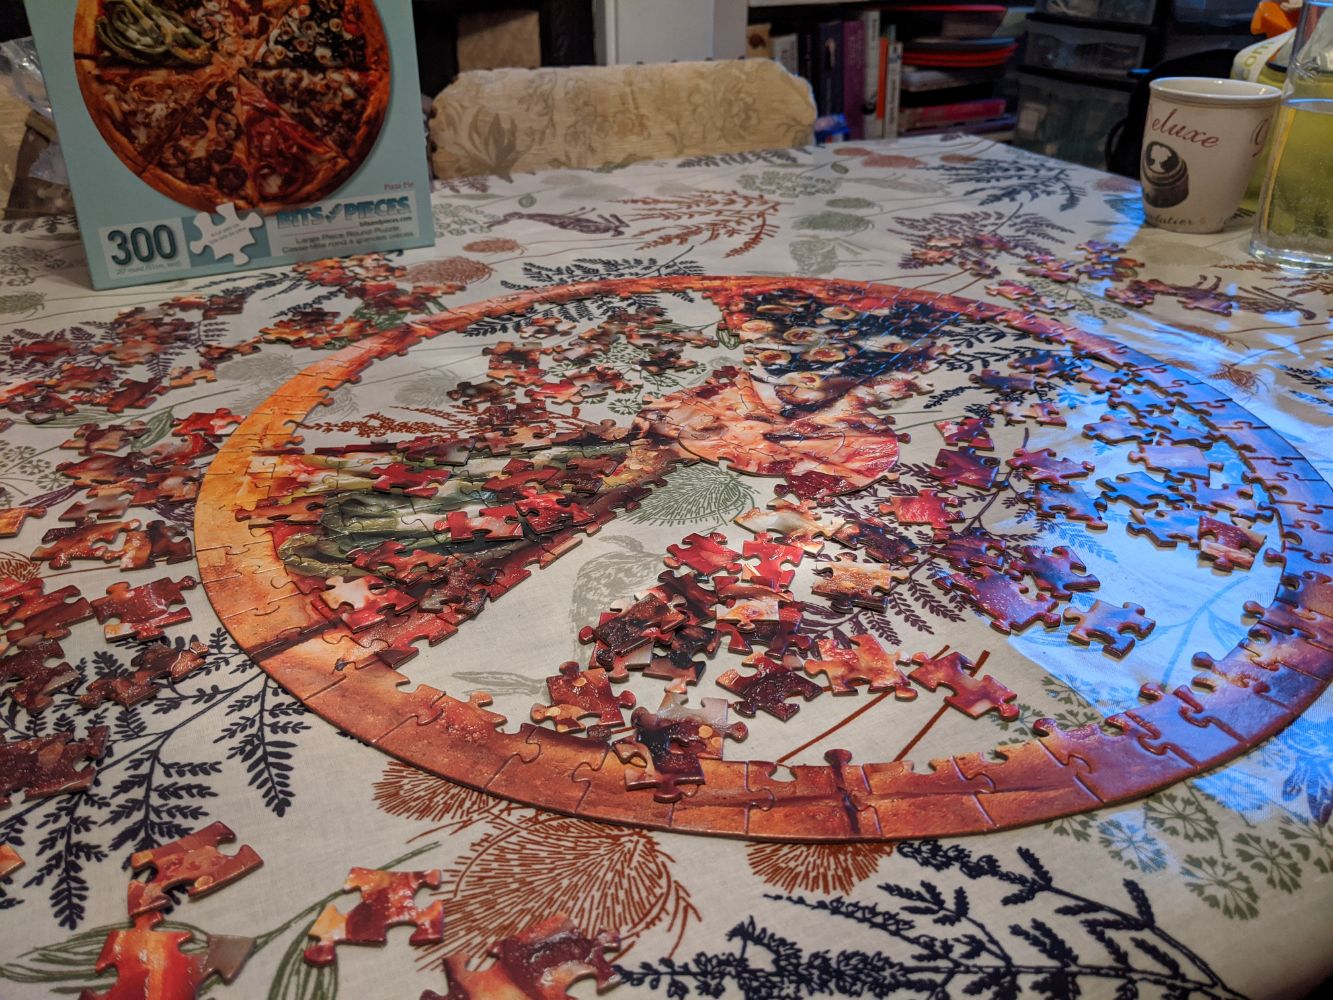 Making good progress on the pizza puzzle, with two of the eights complete